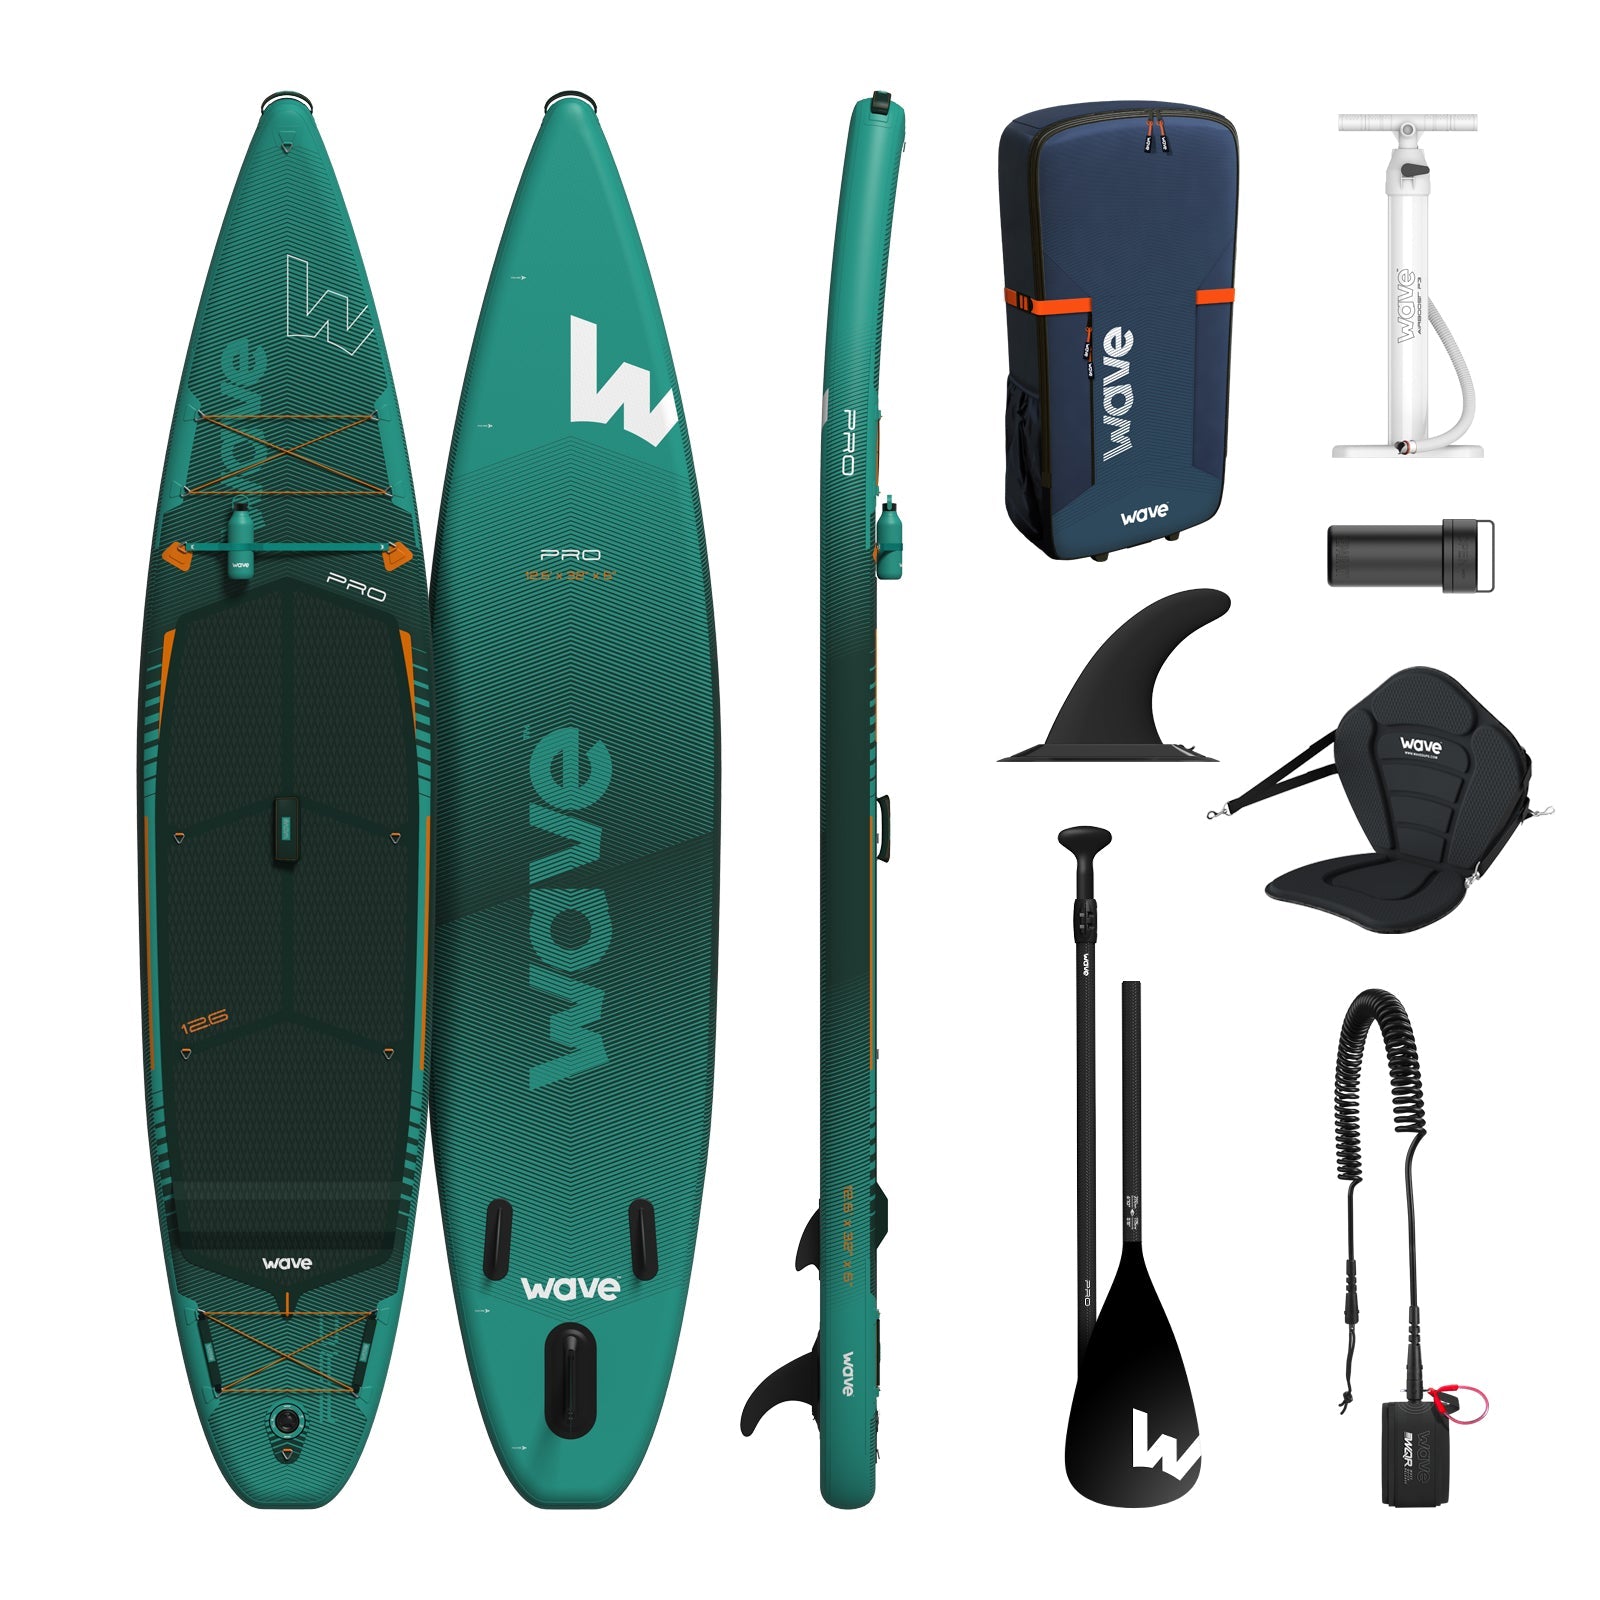 Pro 2.0 SUP | Inflatable Paddleboard | 12'6ft | Teal - Wave Sups UK